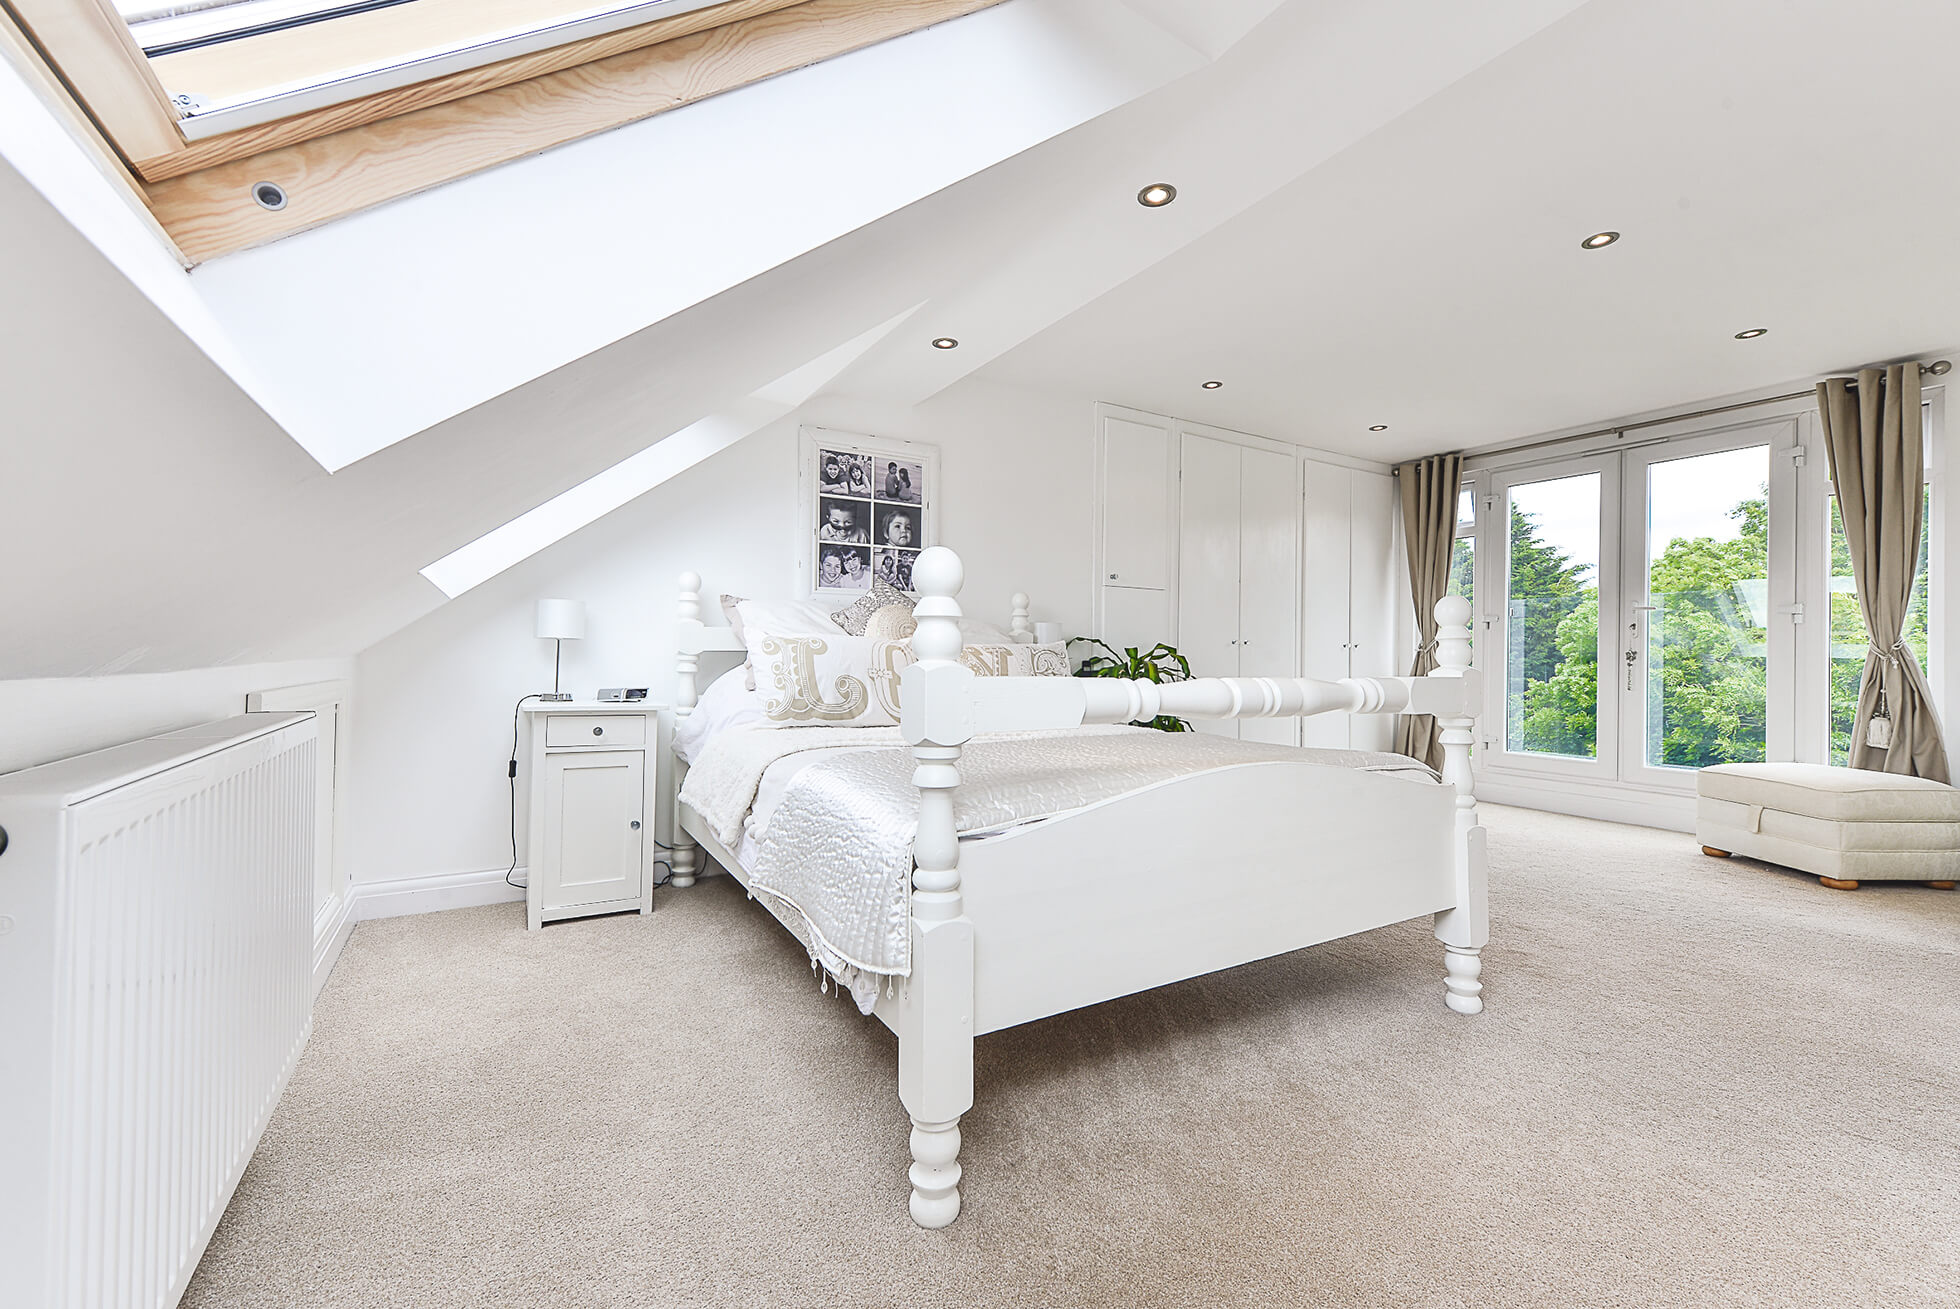 Do you have a question about converting your Loft in Trowley Bottom? Here are the most popular questions asked by our clients.